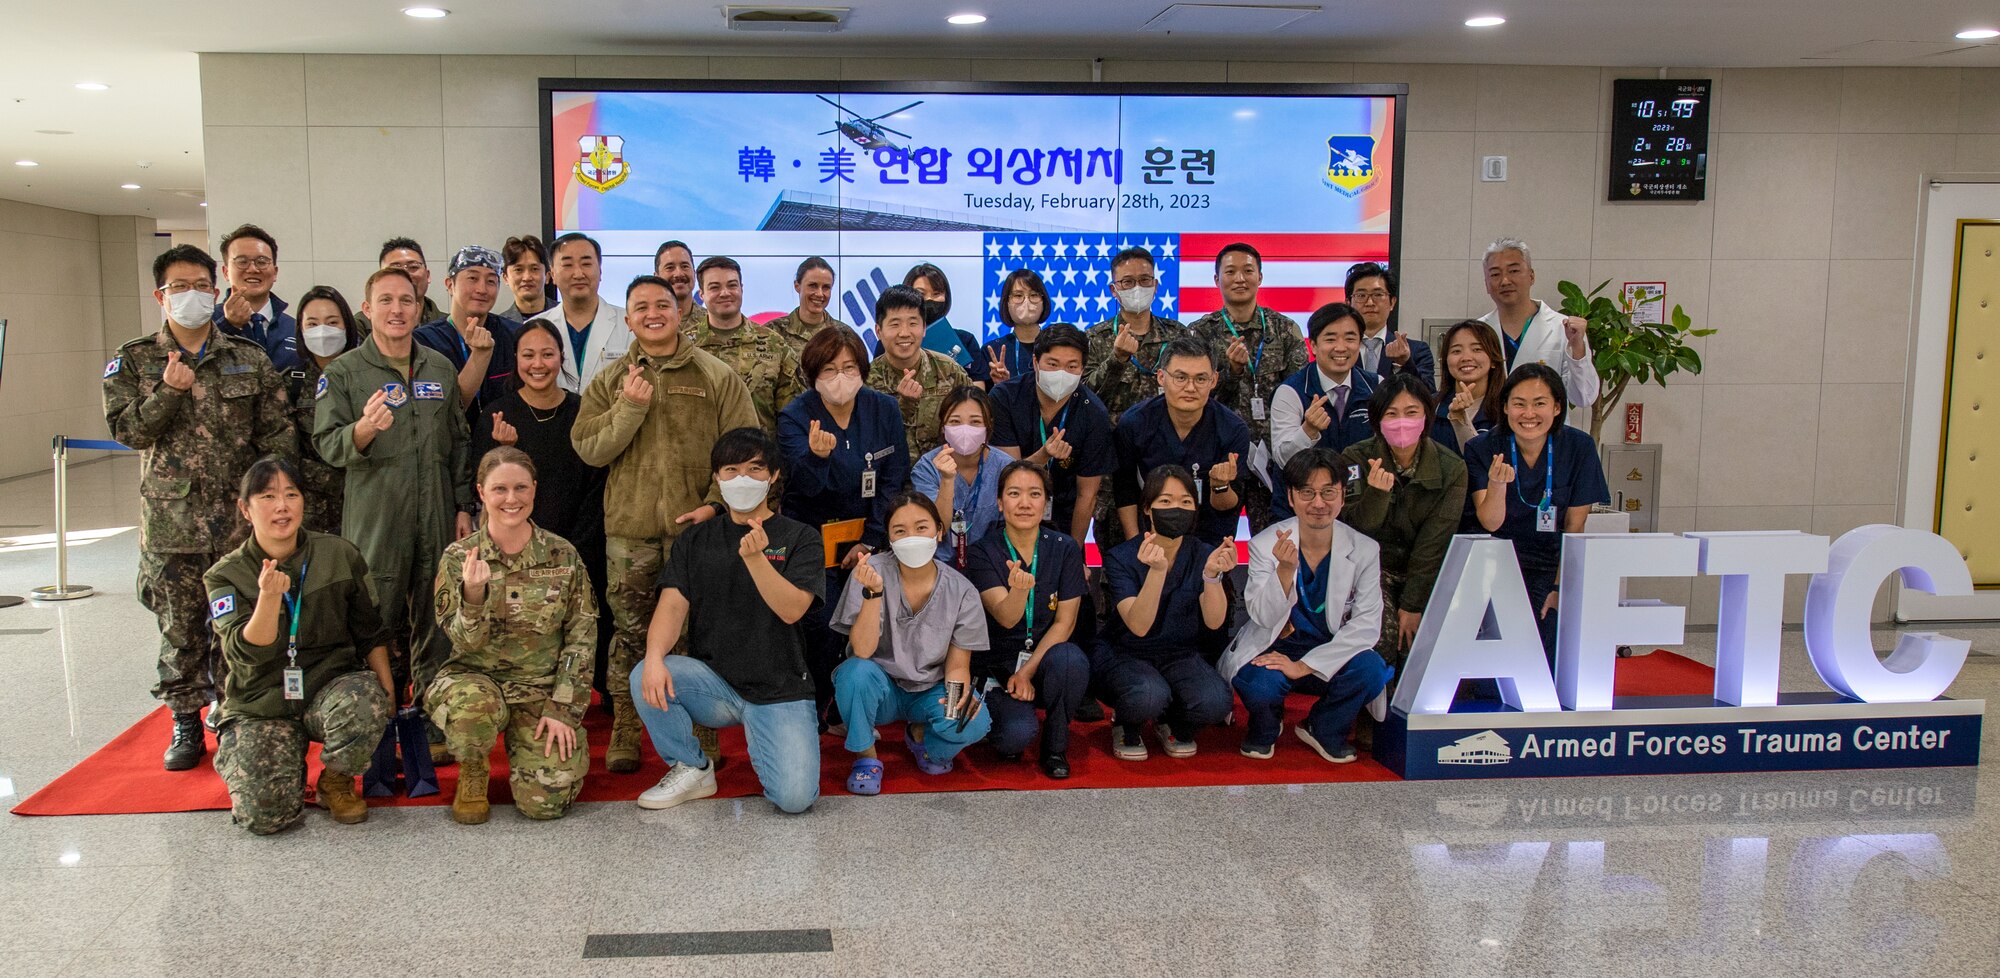 Personnel from the 51st Medical Group, 3-2 General Support Aviation Battalion and Republic of Korea Armed Forces Trauma Center (AFTC) pose for a group photo after the joint trauma training event at the AFTC, Republic of Korea, Feb. 28, 2023. The training event allowed the 51st MDG, 3-2 GSAB and AFTC to train treating trauma patients jointly. (U.S. Air Force photo by Airman 1st Class Aaron Edwards)